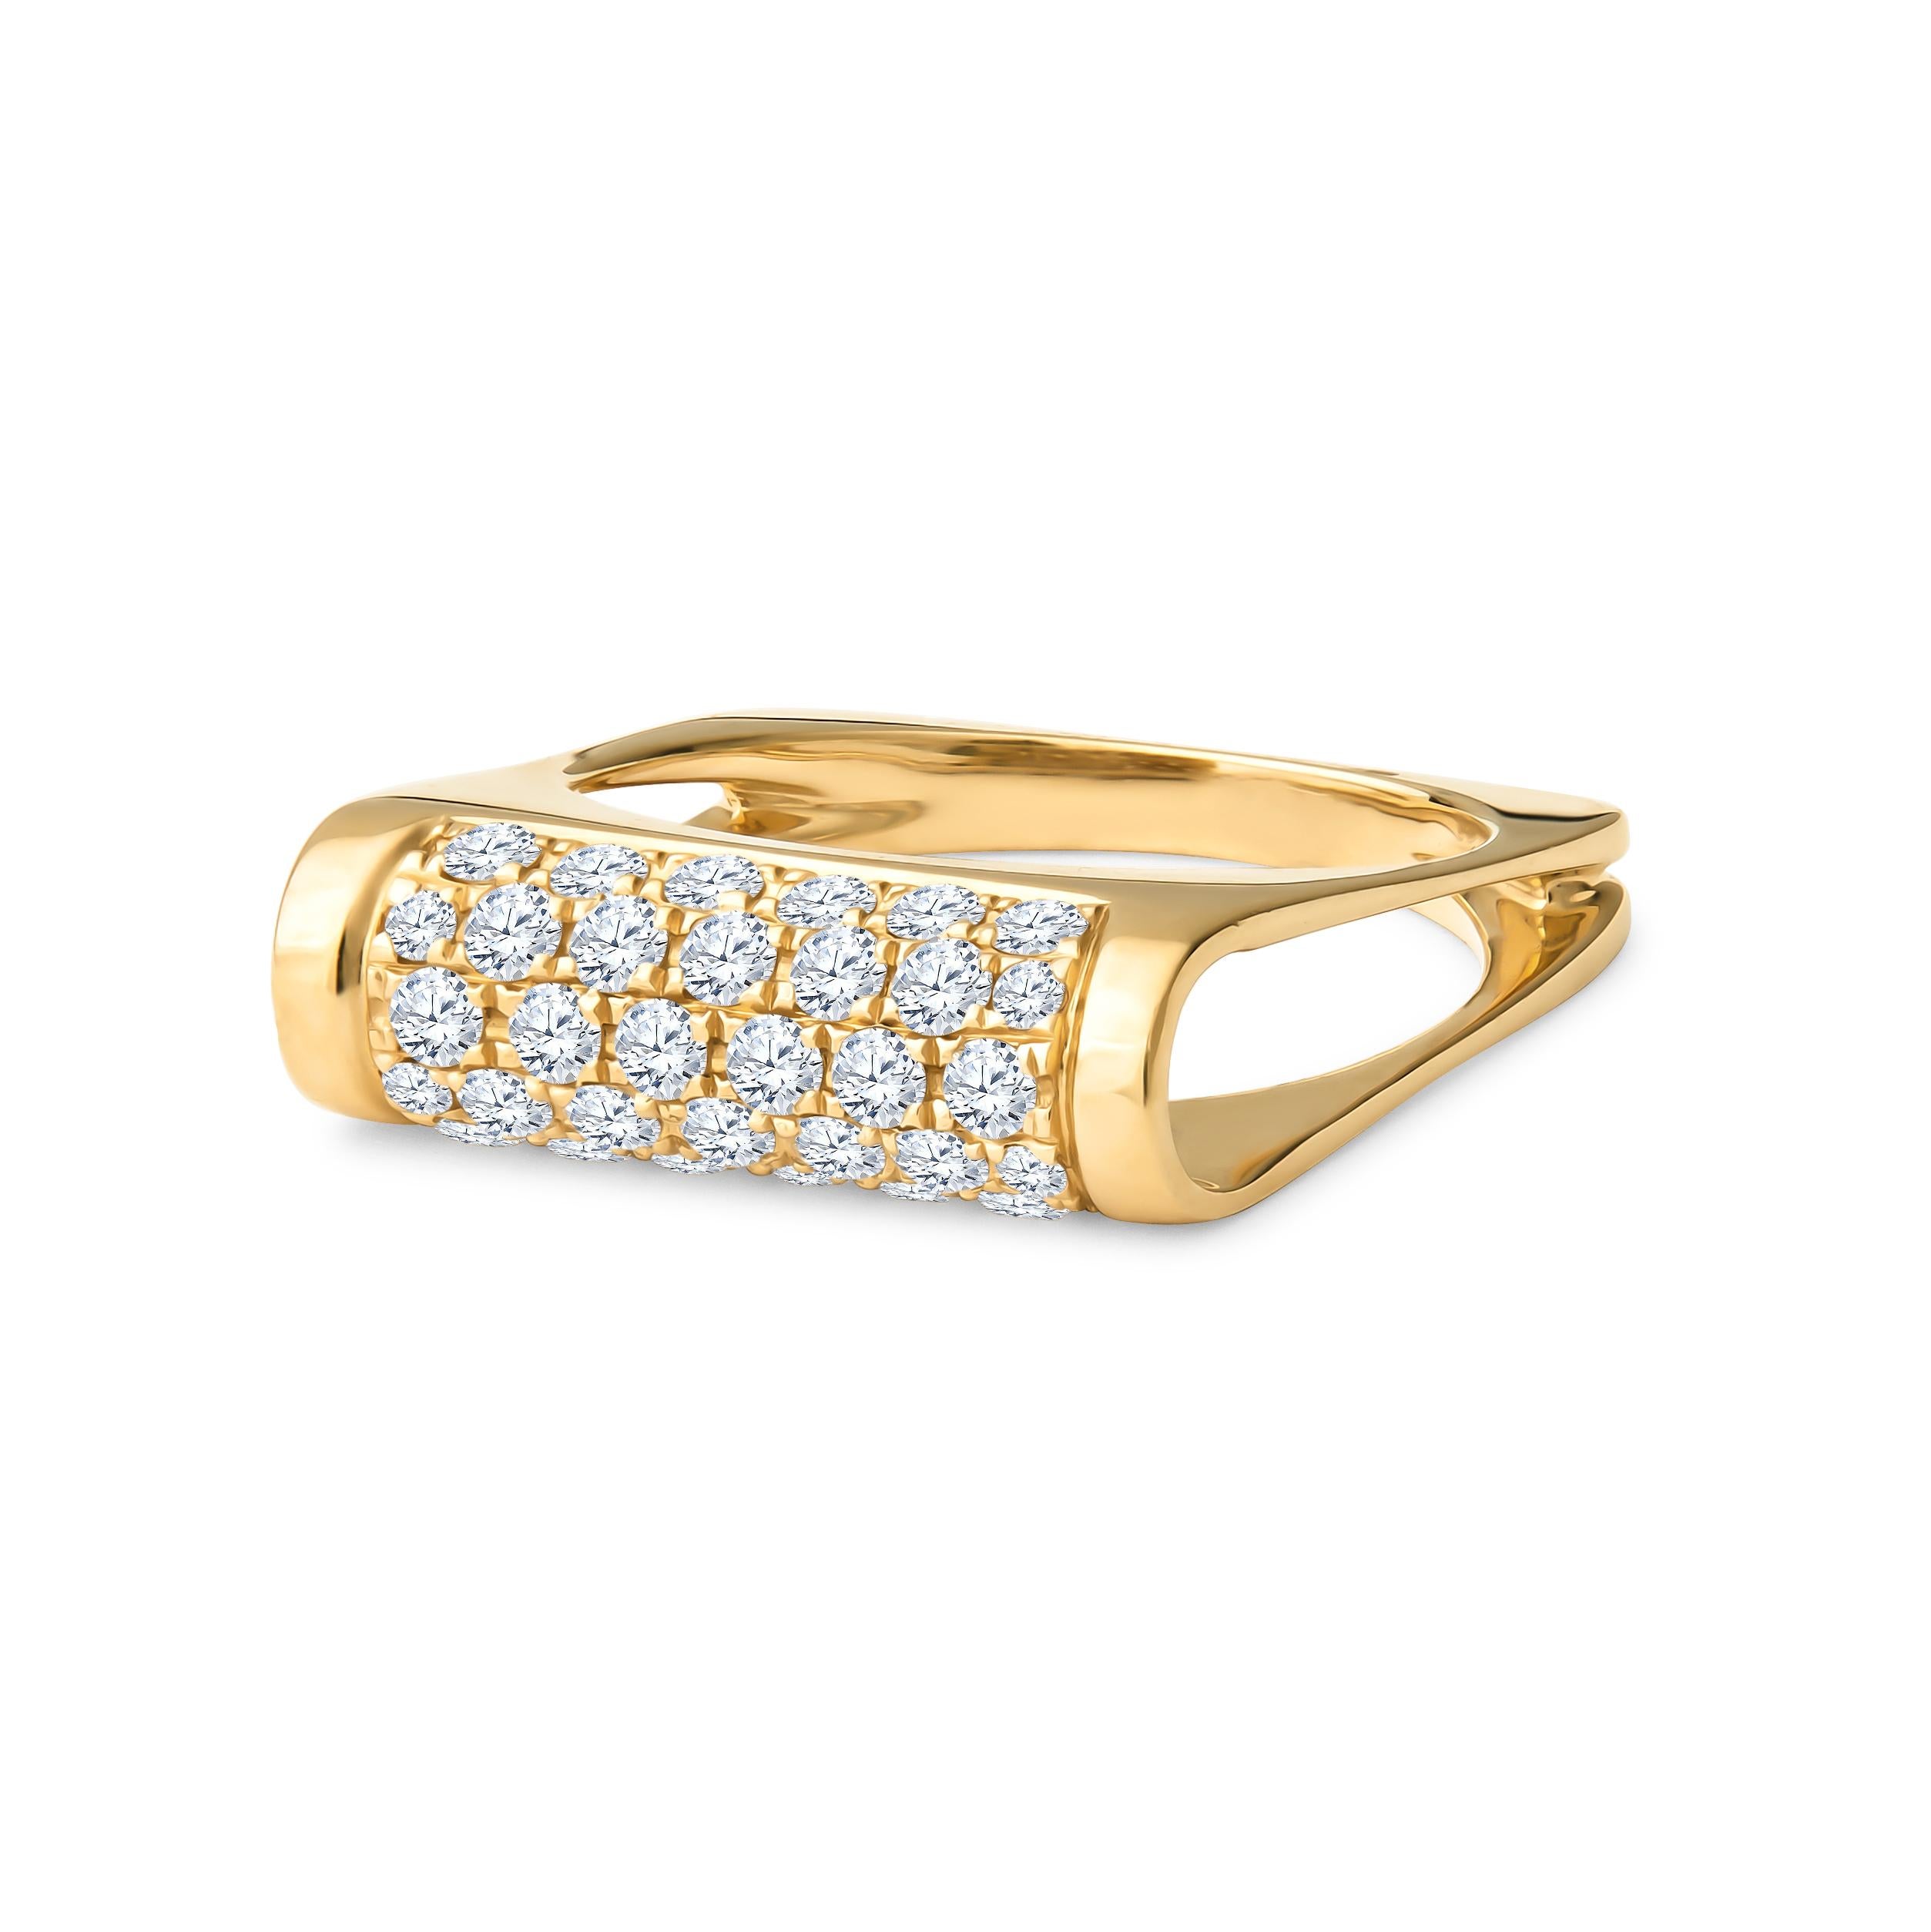 This incredible ring is a unique one, with open sides and a squared frame for the shank. The top of the ring is a rounded bar covered in pave round diamonds, 0.70ctw, set in 18kt yellow gold. The ring itself is a size 6, but can be resized upon